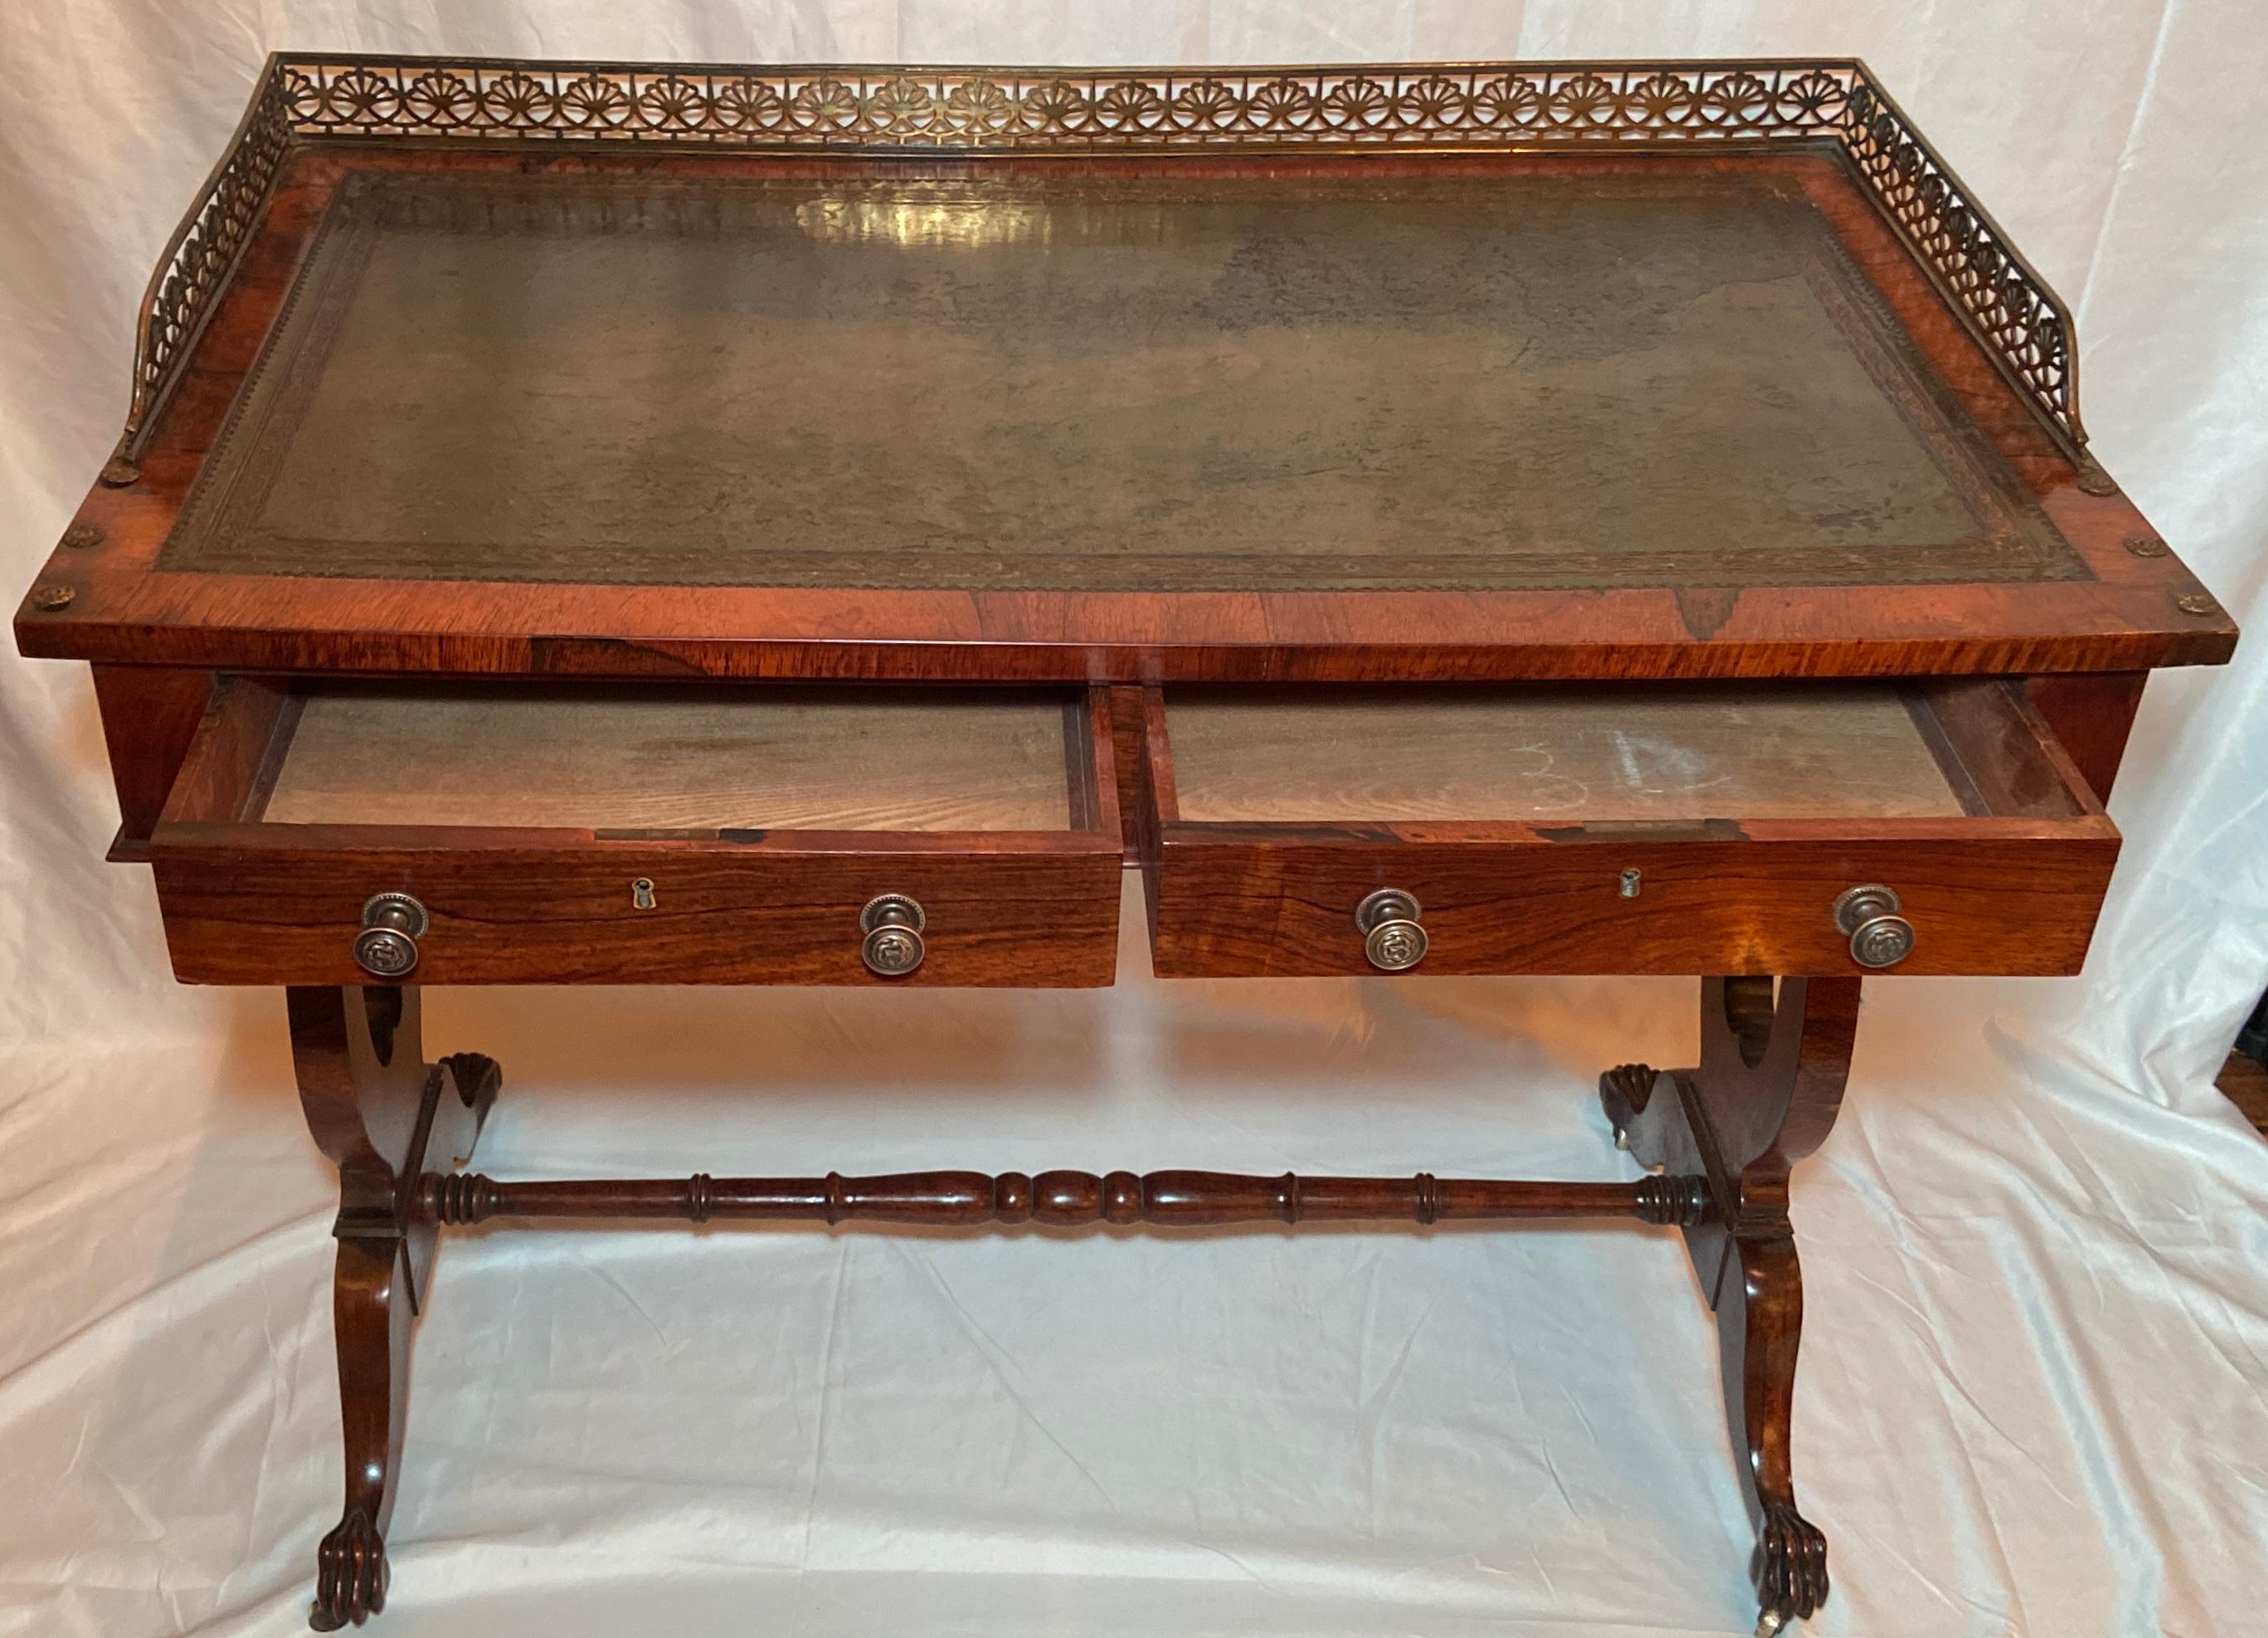 William IV Antique English Regency Period Rosewood Writing Table, circa 1810-1820 For Sale